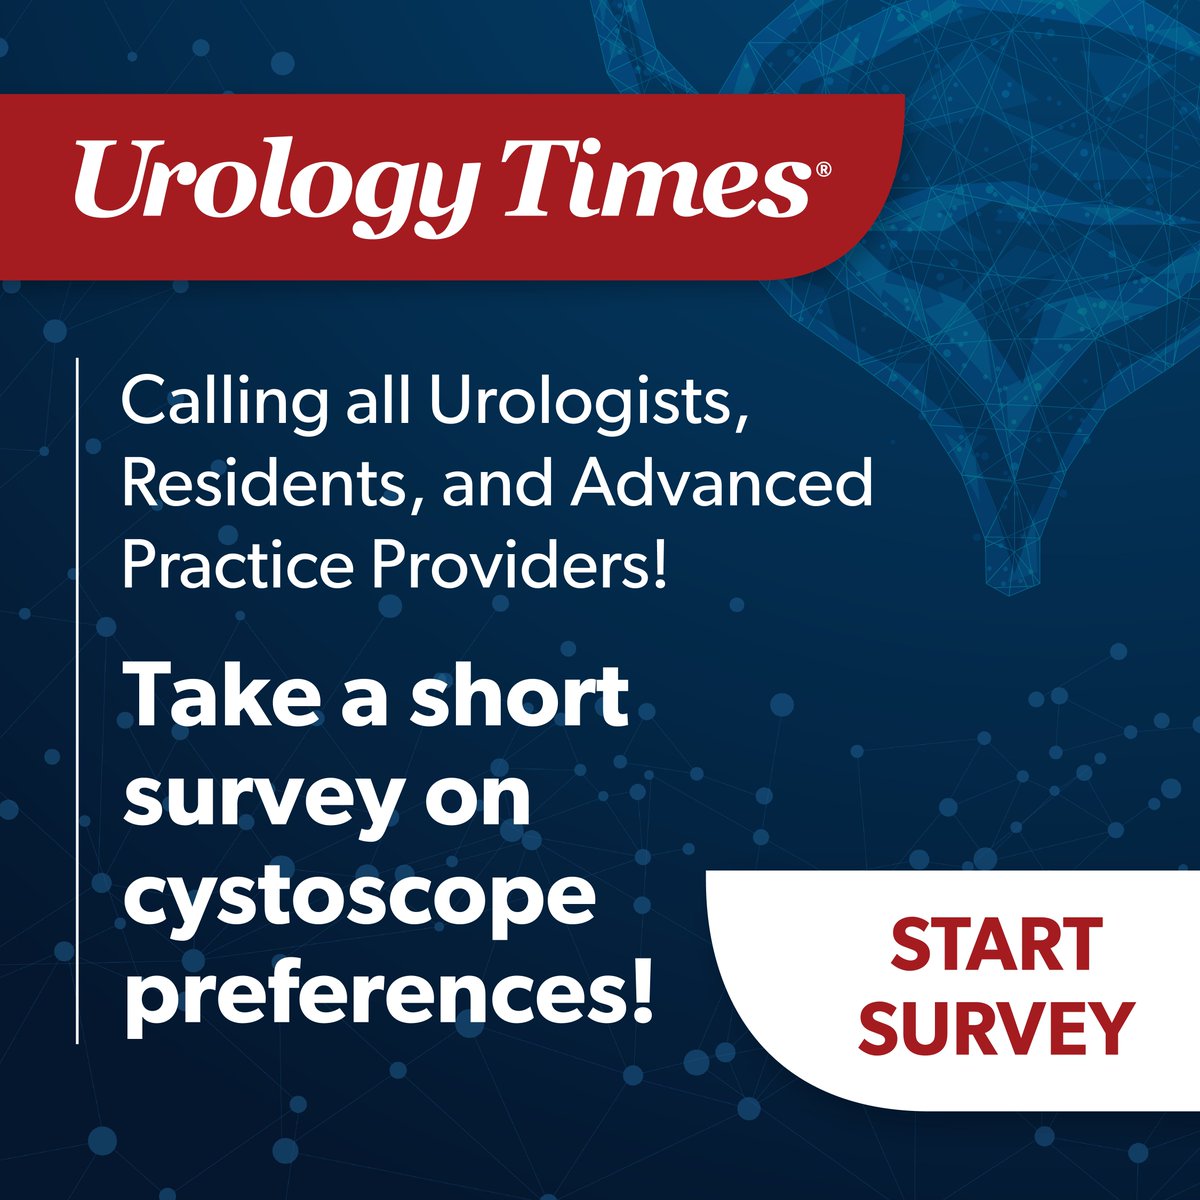 Let's dive into cystoscope preferences and practices! Your voice matters in our quick survey developed with Urology Times®. Share your insights now: ow.ly/e10c50Rh3Zj #Cystoscope #Urology